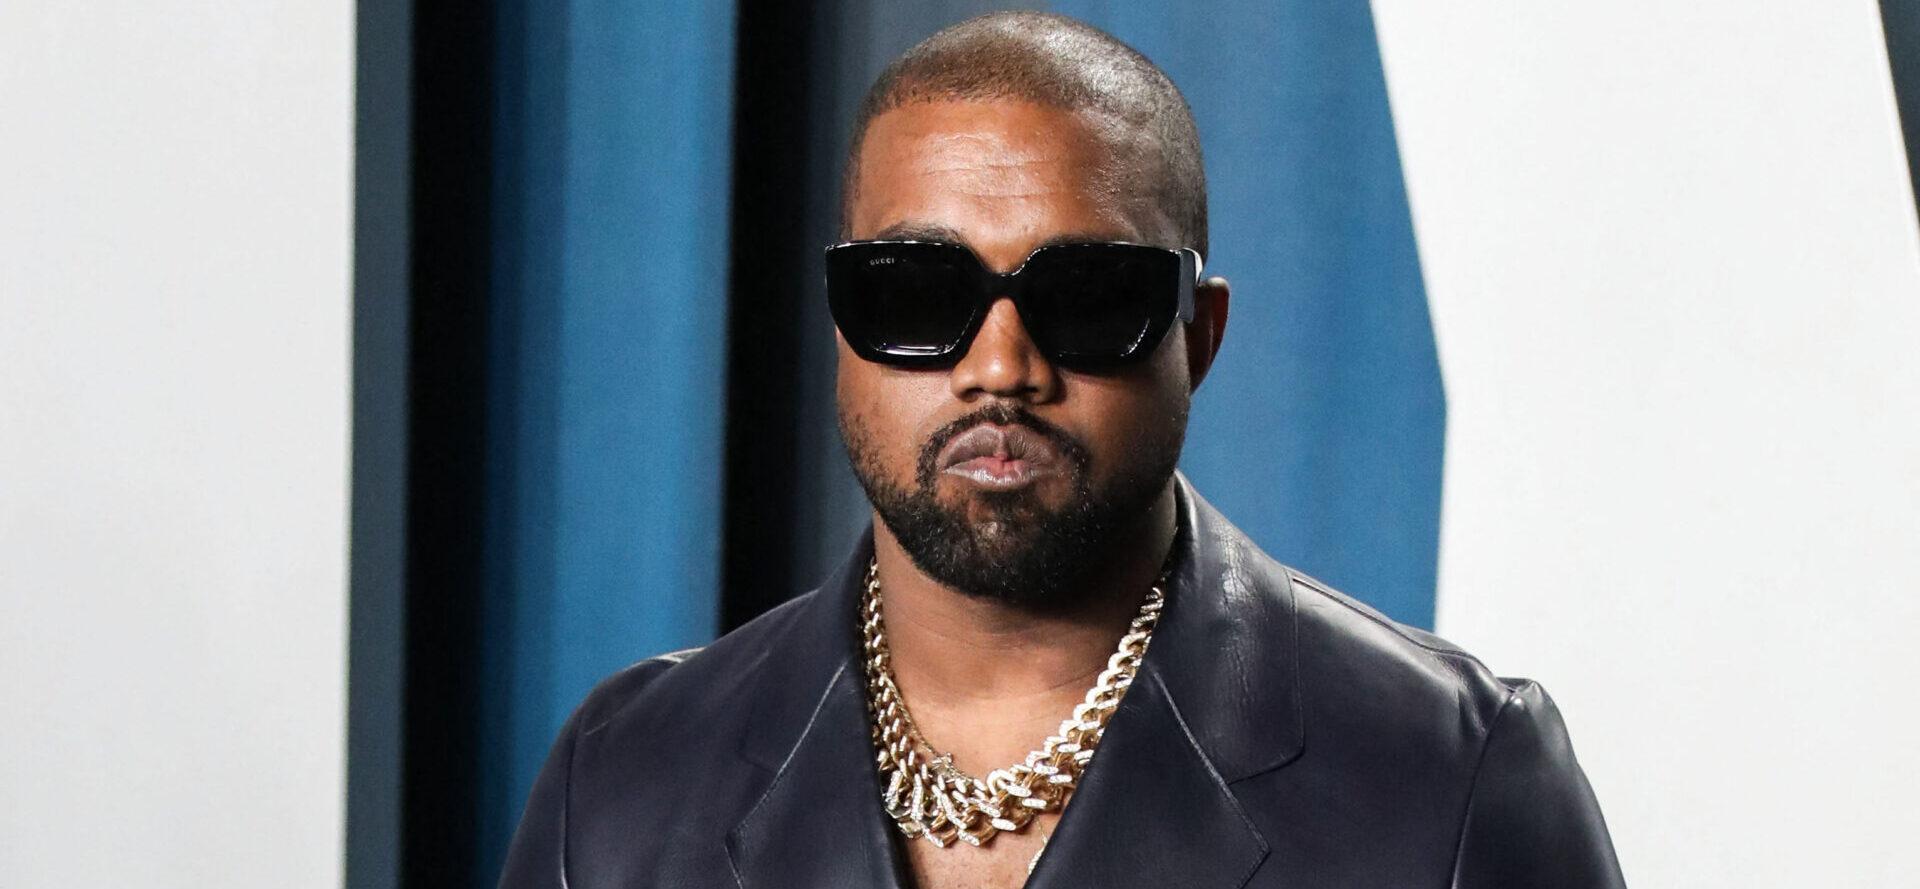 Kanye West Drags Taylor Swift In New Highly Charged IG Post